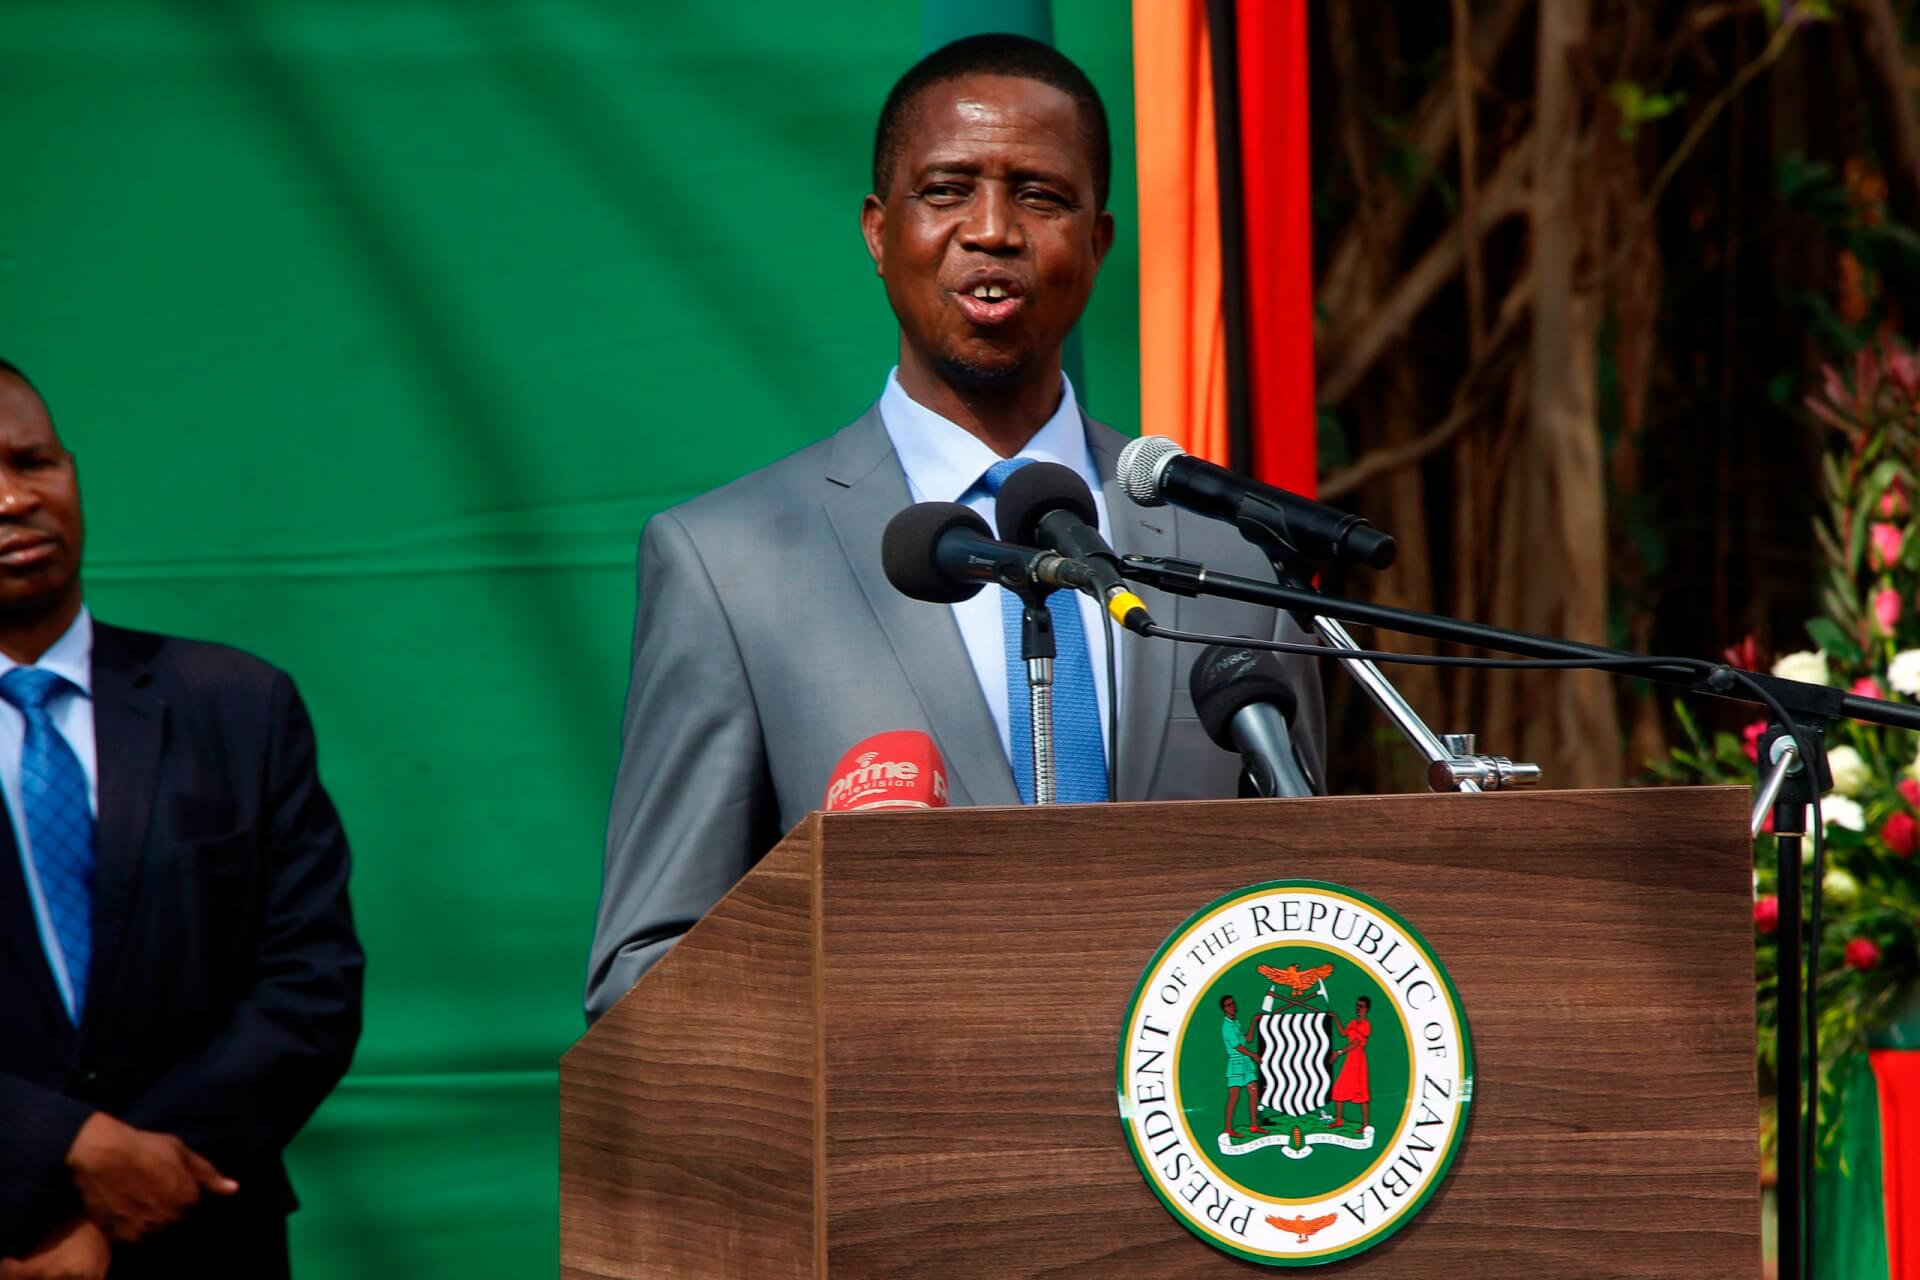 Zambia President Seeks to Amend Constitution & Abolish Voters’ List Ahead of 2021 Election